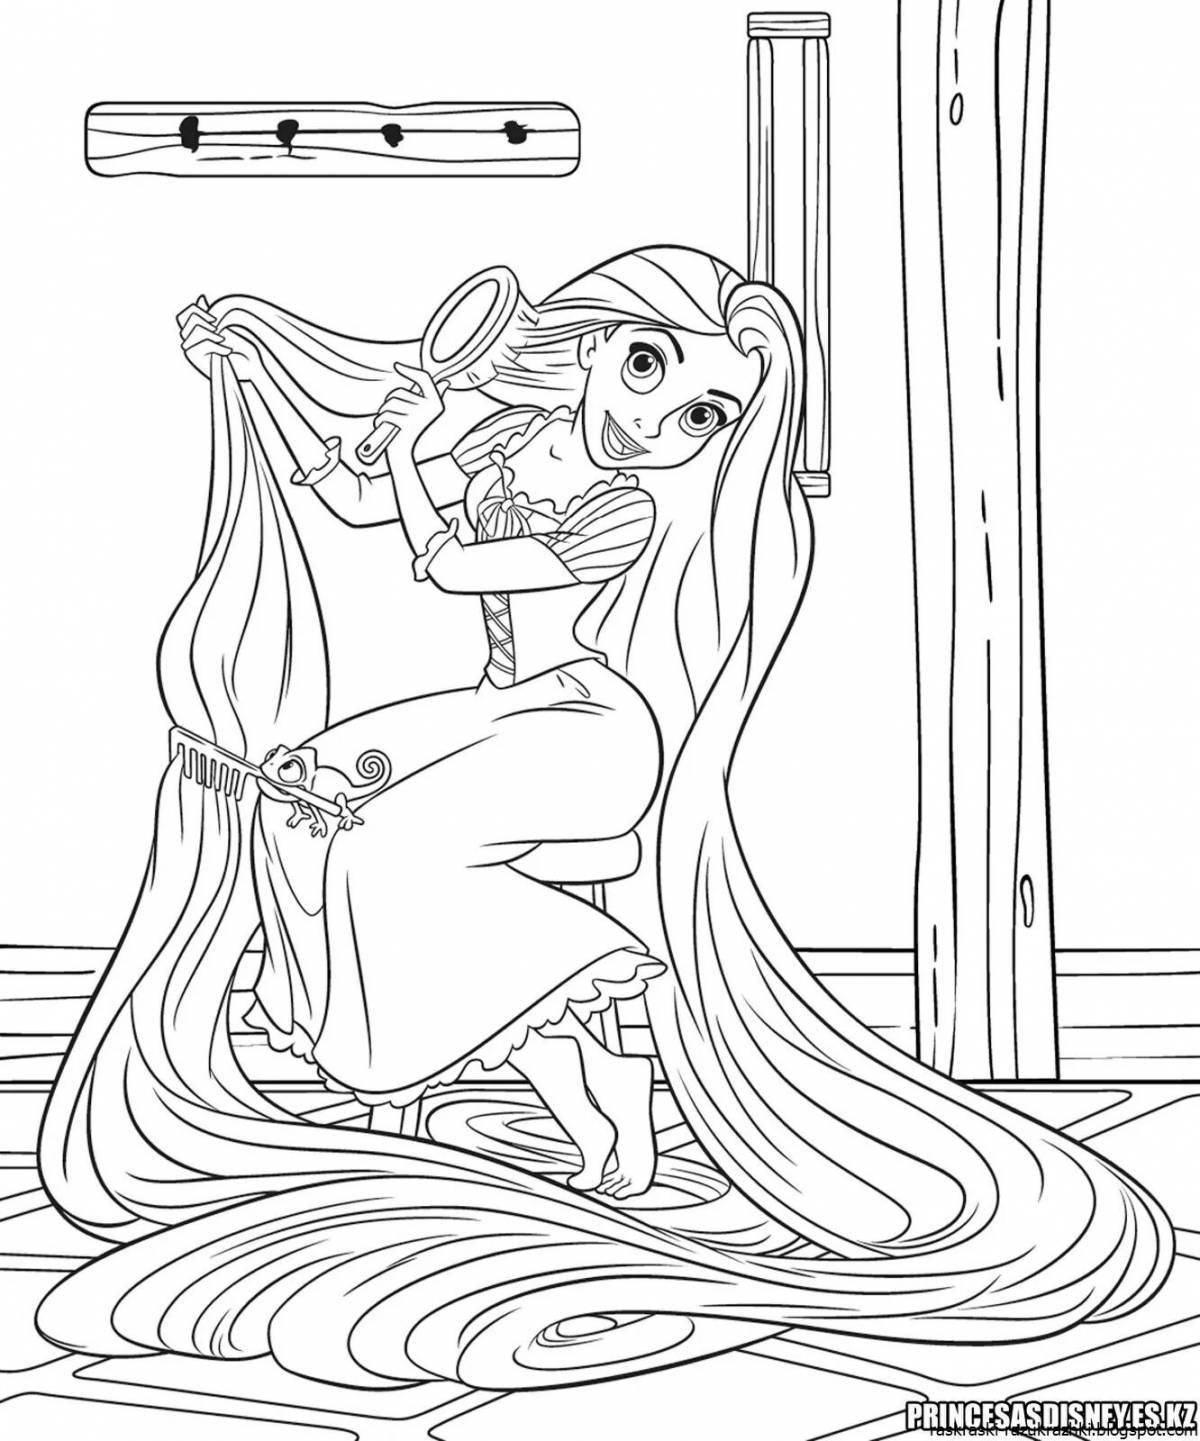 Magic Rapunzel coloring book for children 5-6 years old